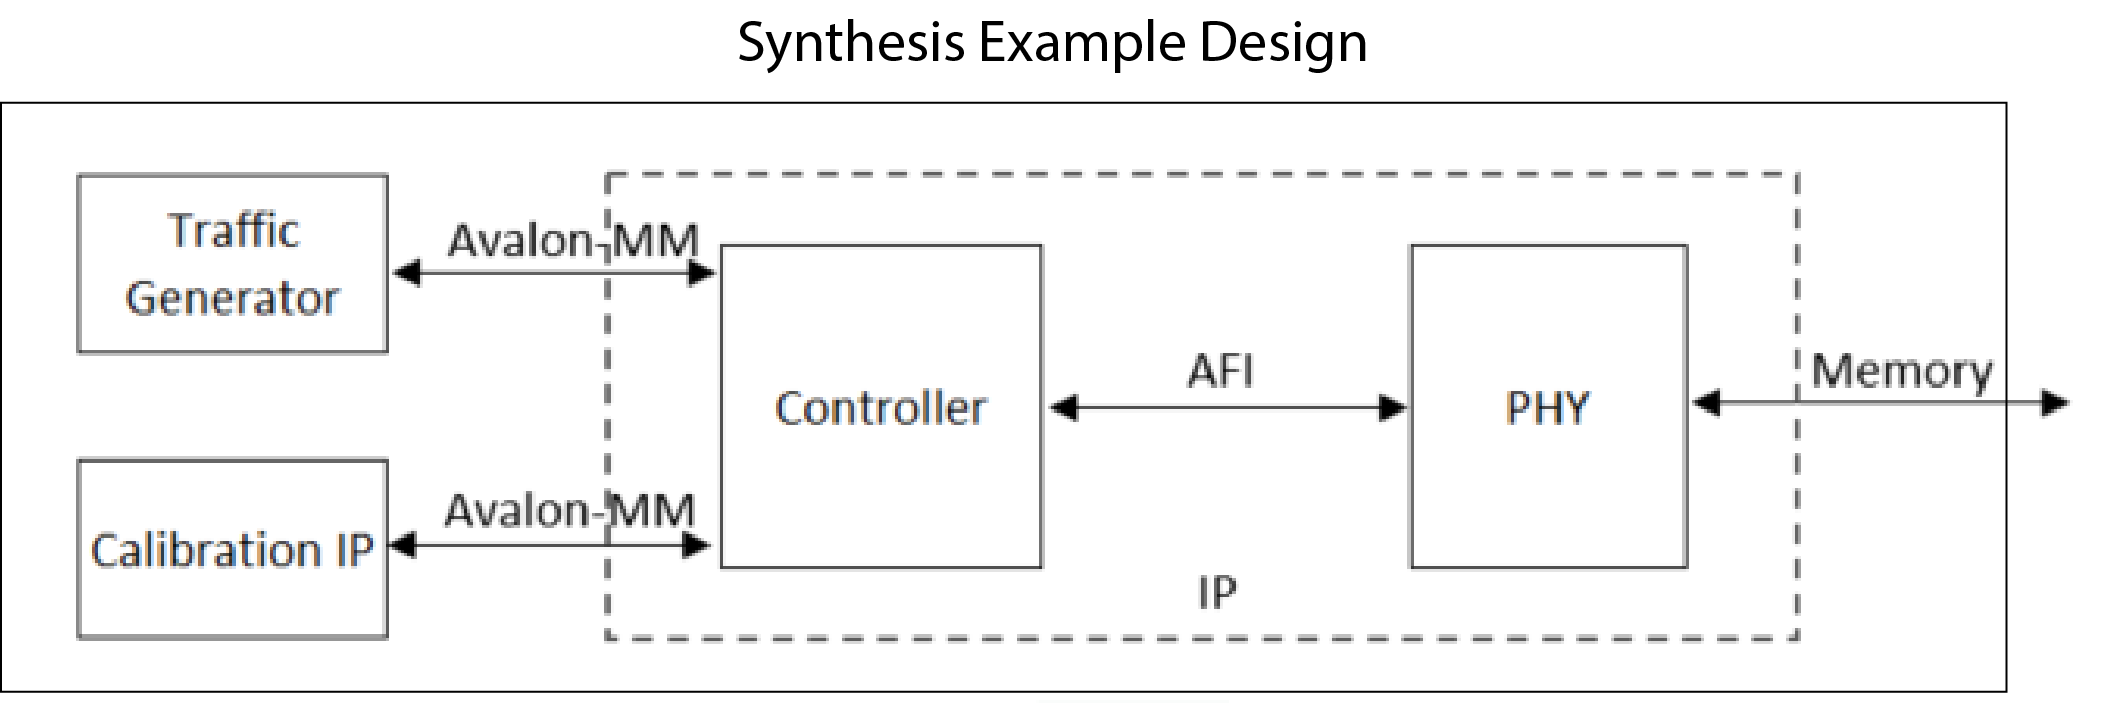 Synthesis Example Design